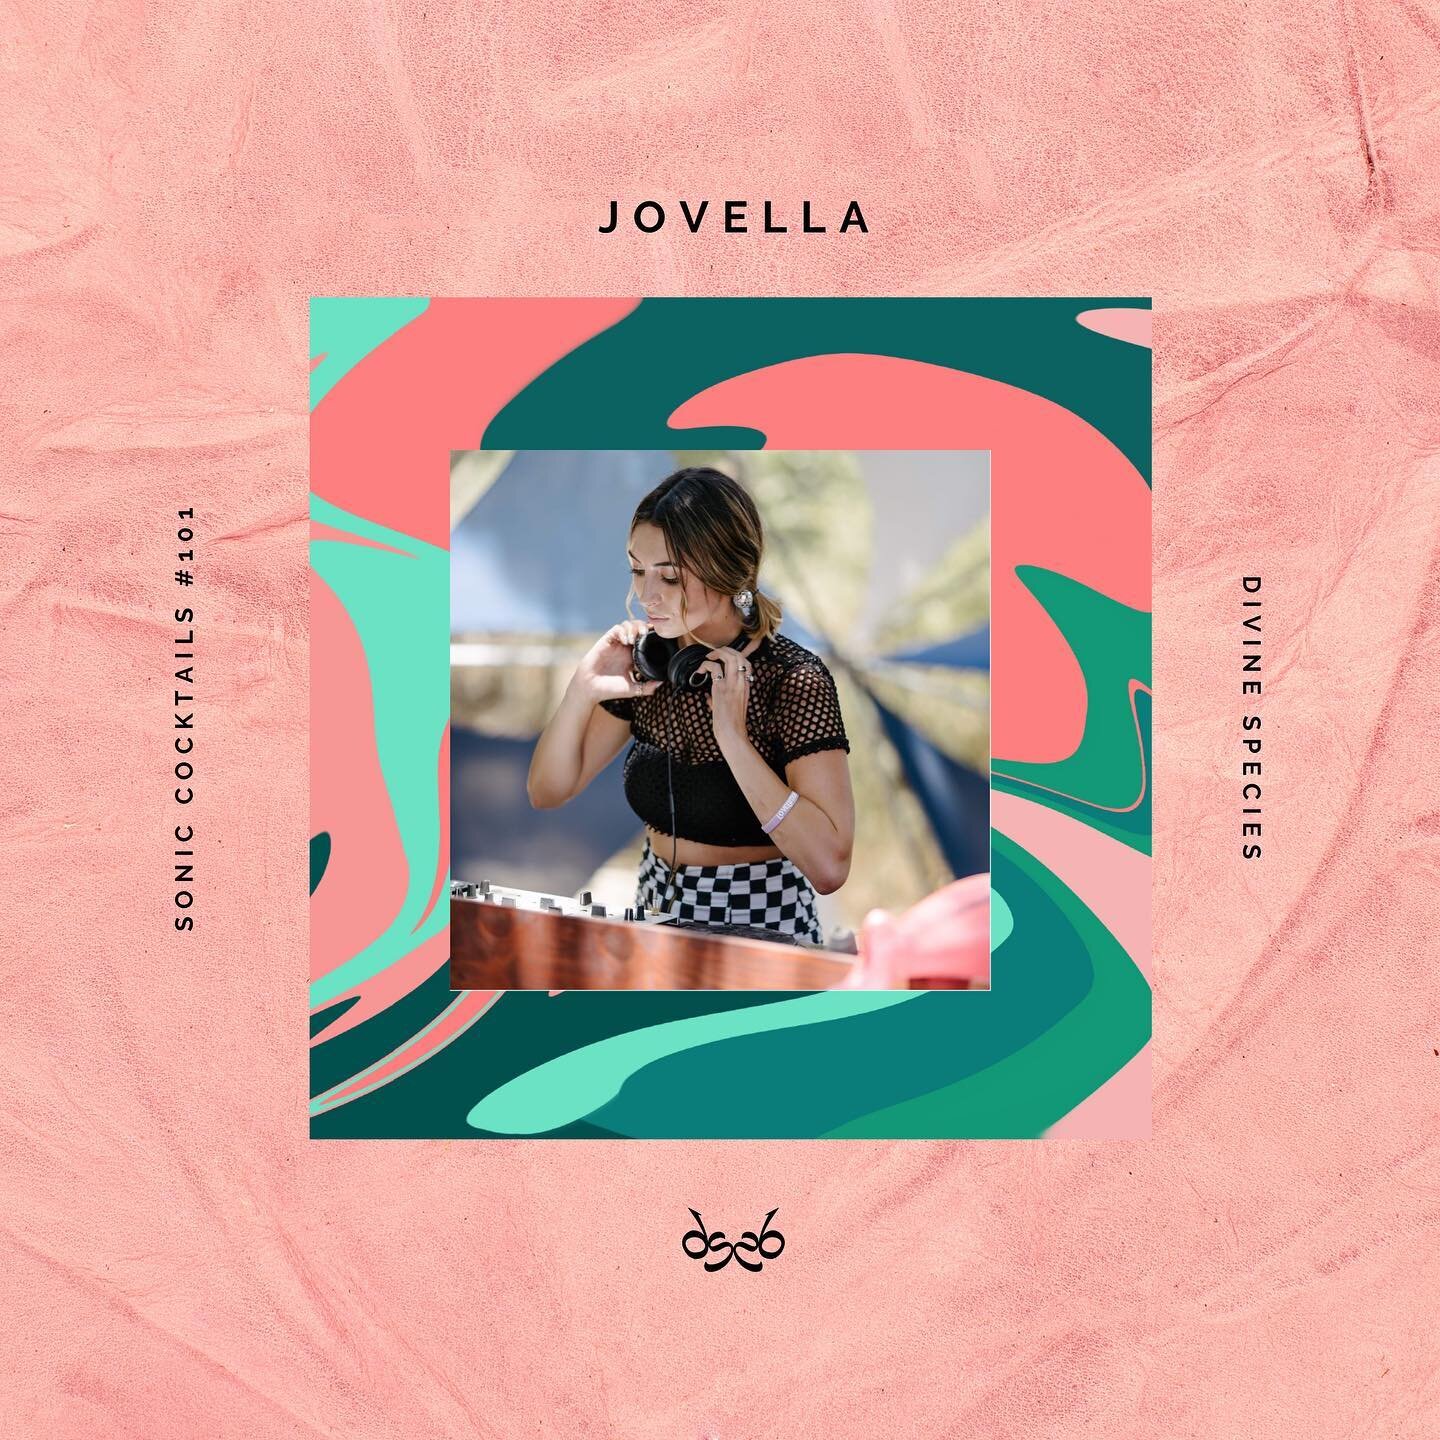 🍸Sonic Cocktails 101🍸

This next mix takes you all over the map, from breaks to driving techno to booty poppin beats... it&rsquo;s got it all. Get on your feet for our next guest on the series, Jovella!

While Jovella has only been mixing for a lit